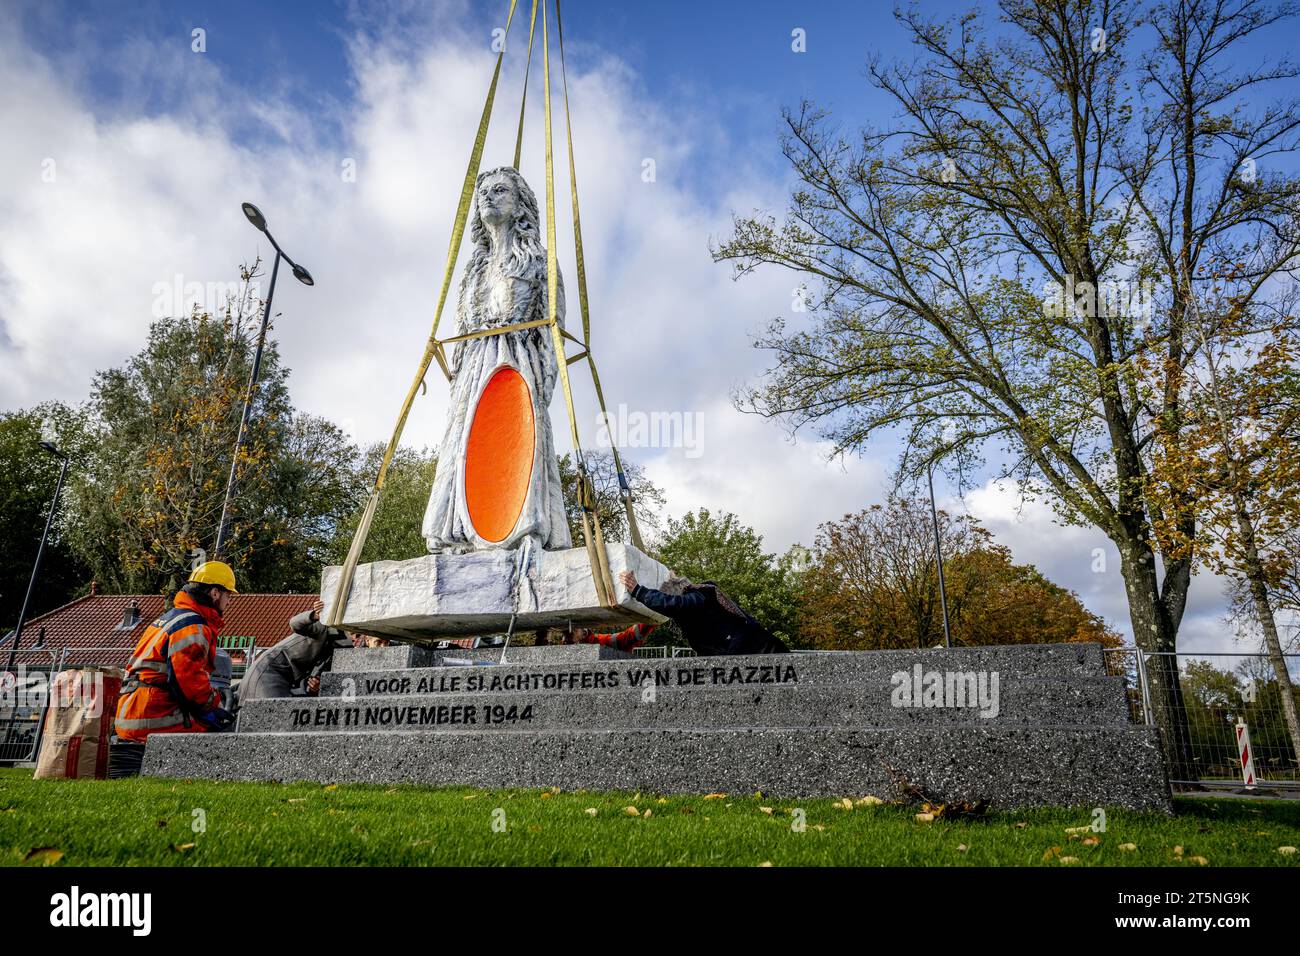 ROTTERDAM - Placing the new Razzia Monument, for the 52,000 residents of Rotterdam and Schiedam who were deported by the German occupier on November 10 and 11, 1944, to perform forced labor. ANP ROBIN UTRECHT netherlands out - belgium out Stock Photo